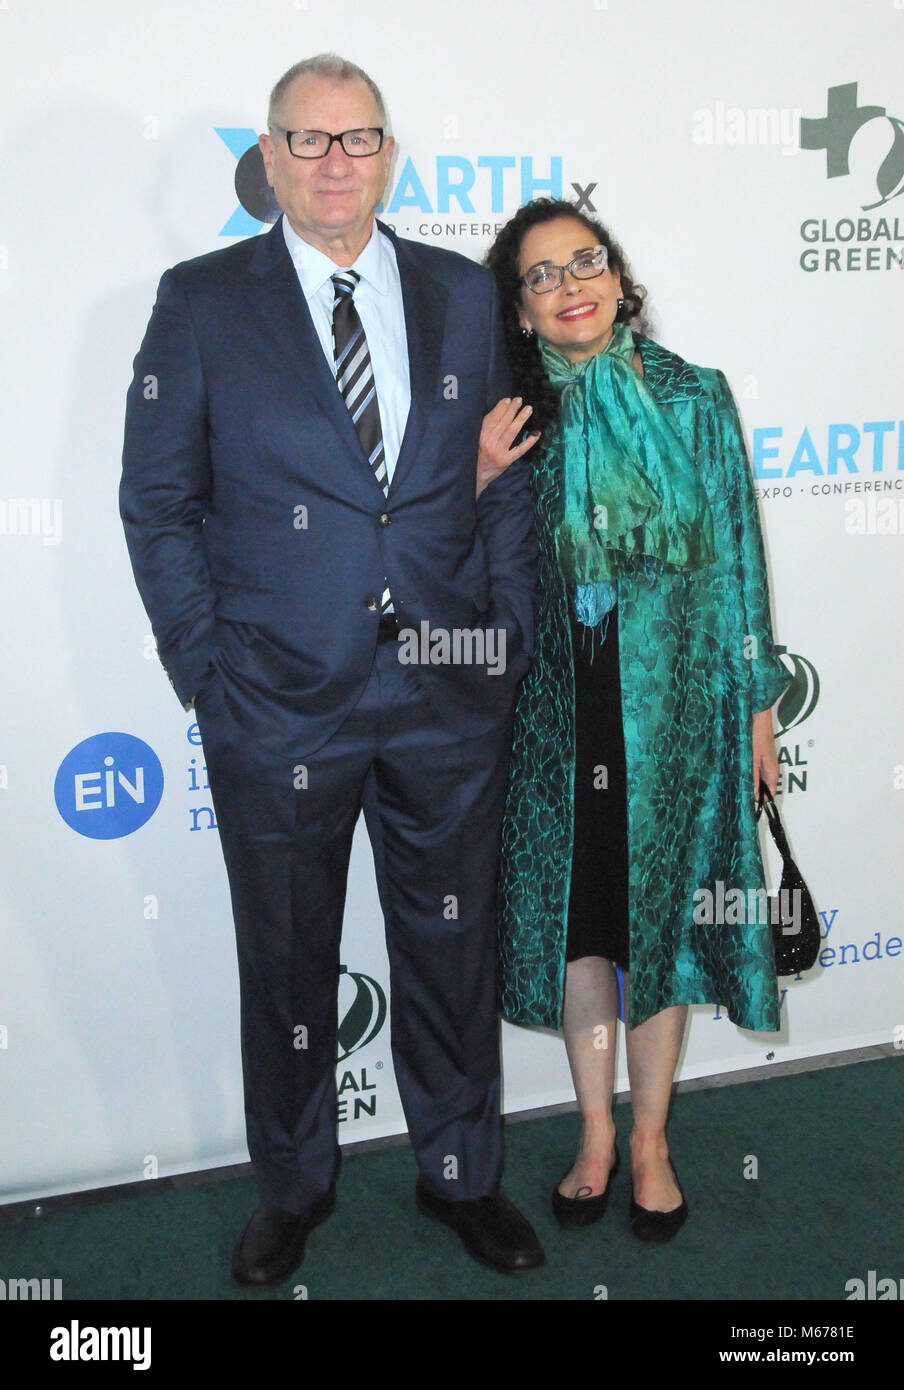 Los Angeles, USA. 28th Feb, 2018. (L-R) Actor Ed O'Neill and Catherine Rusoff attend the 15th Annual Global Green Pre-Oscar Gala at NeueHouse Hollywood on February 28, 2018 in Los Angeles, California. Photo by Barry King/Alamy Live News Stock Photo